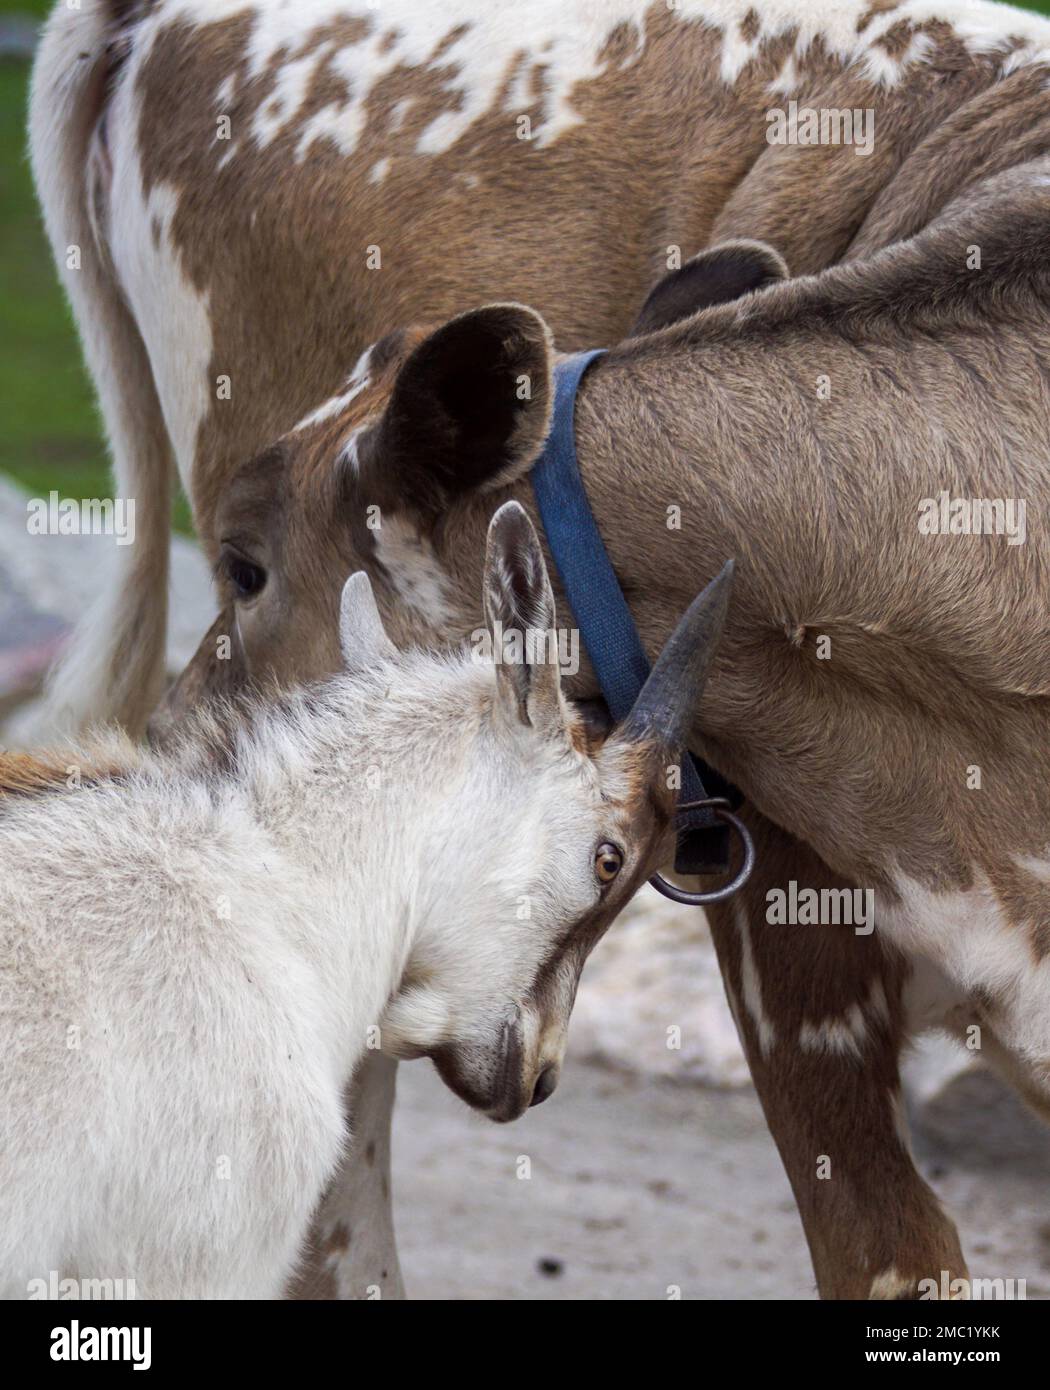 Close-up of goat and cow standing on field Stock Photo